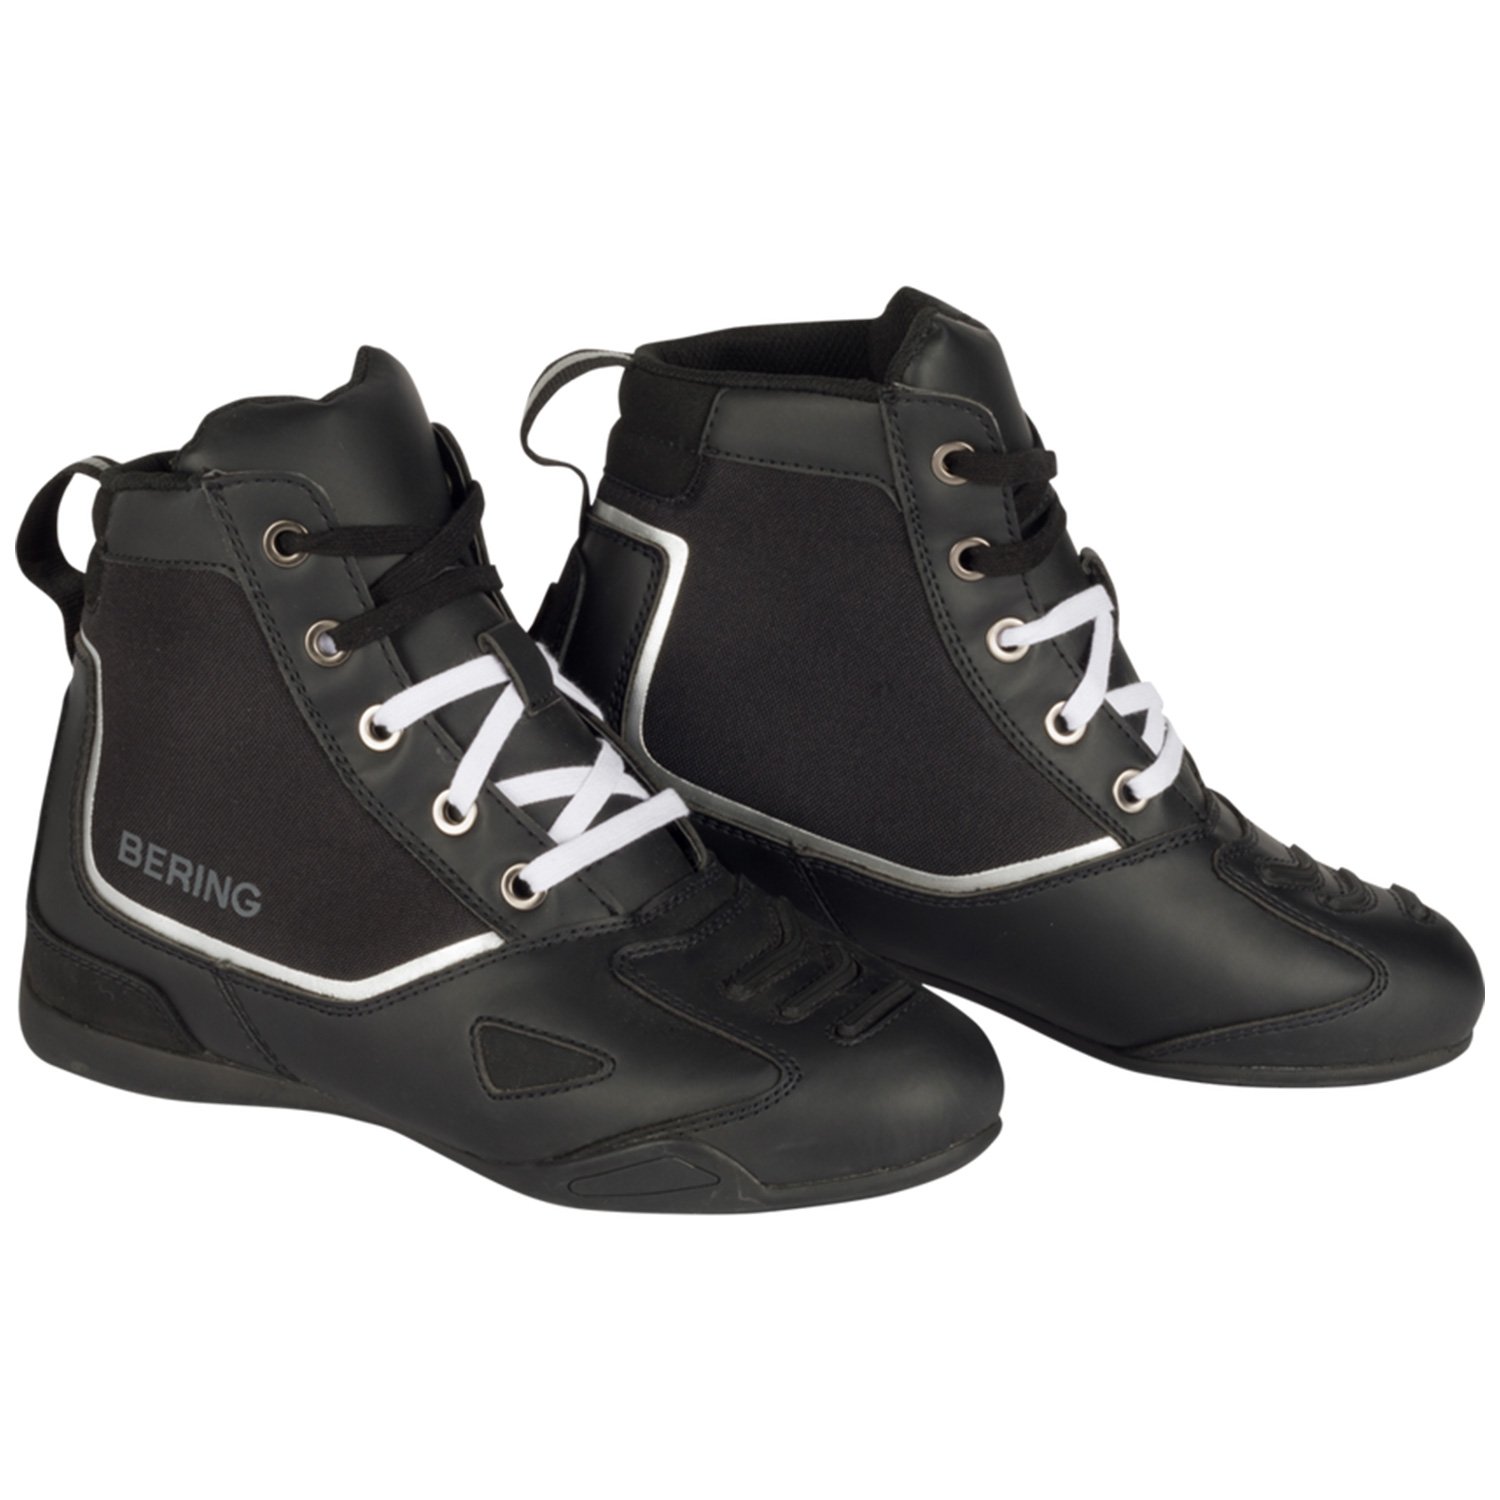 Image of Bering Active Shoes Black Size 40 ID 3660815184202